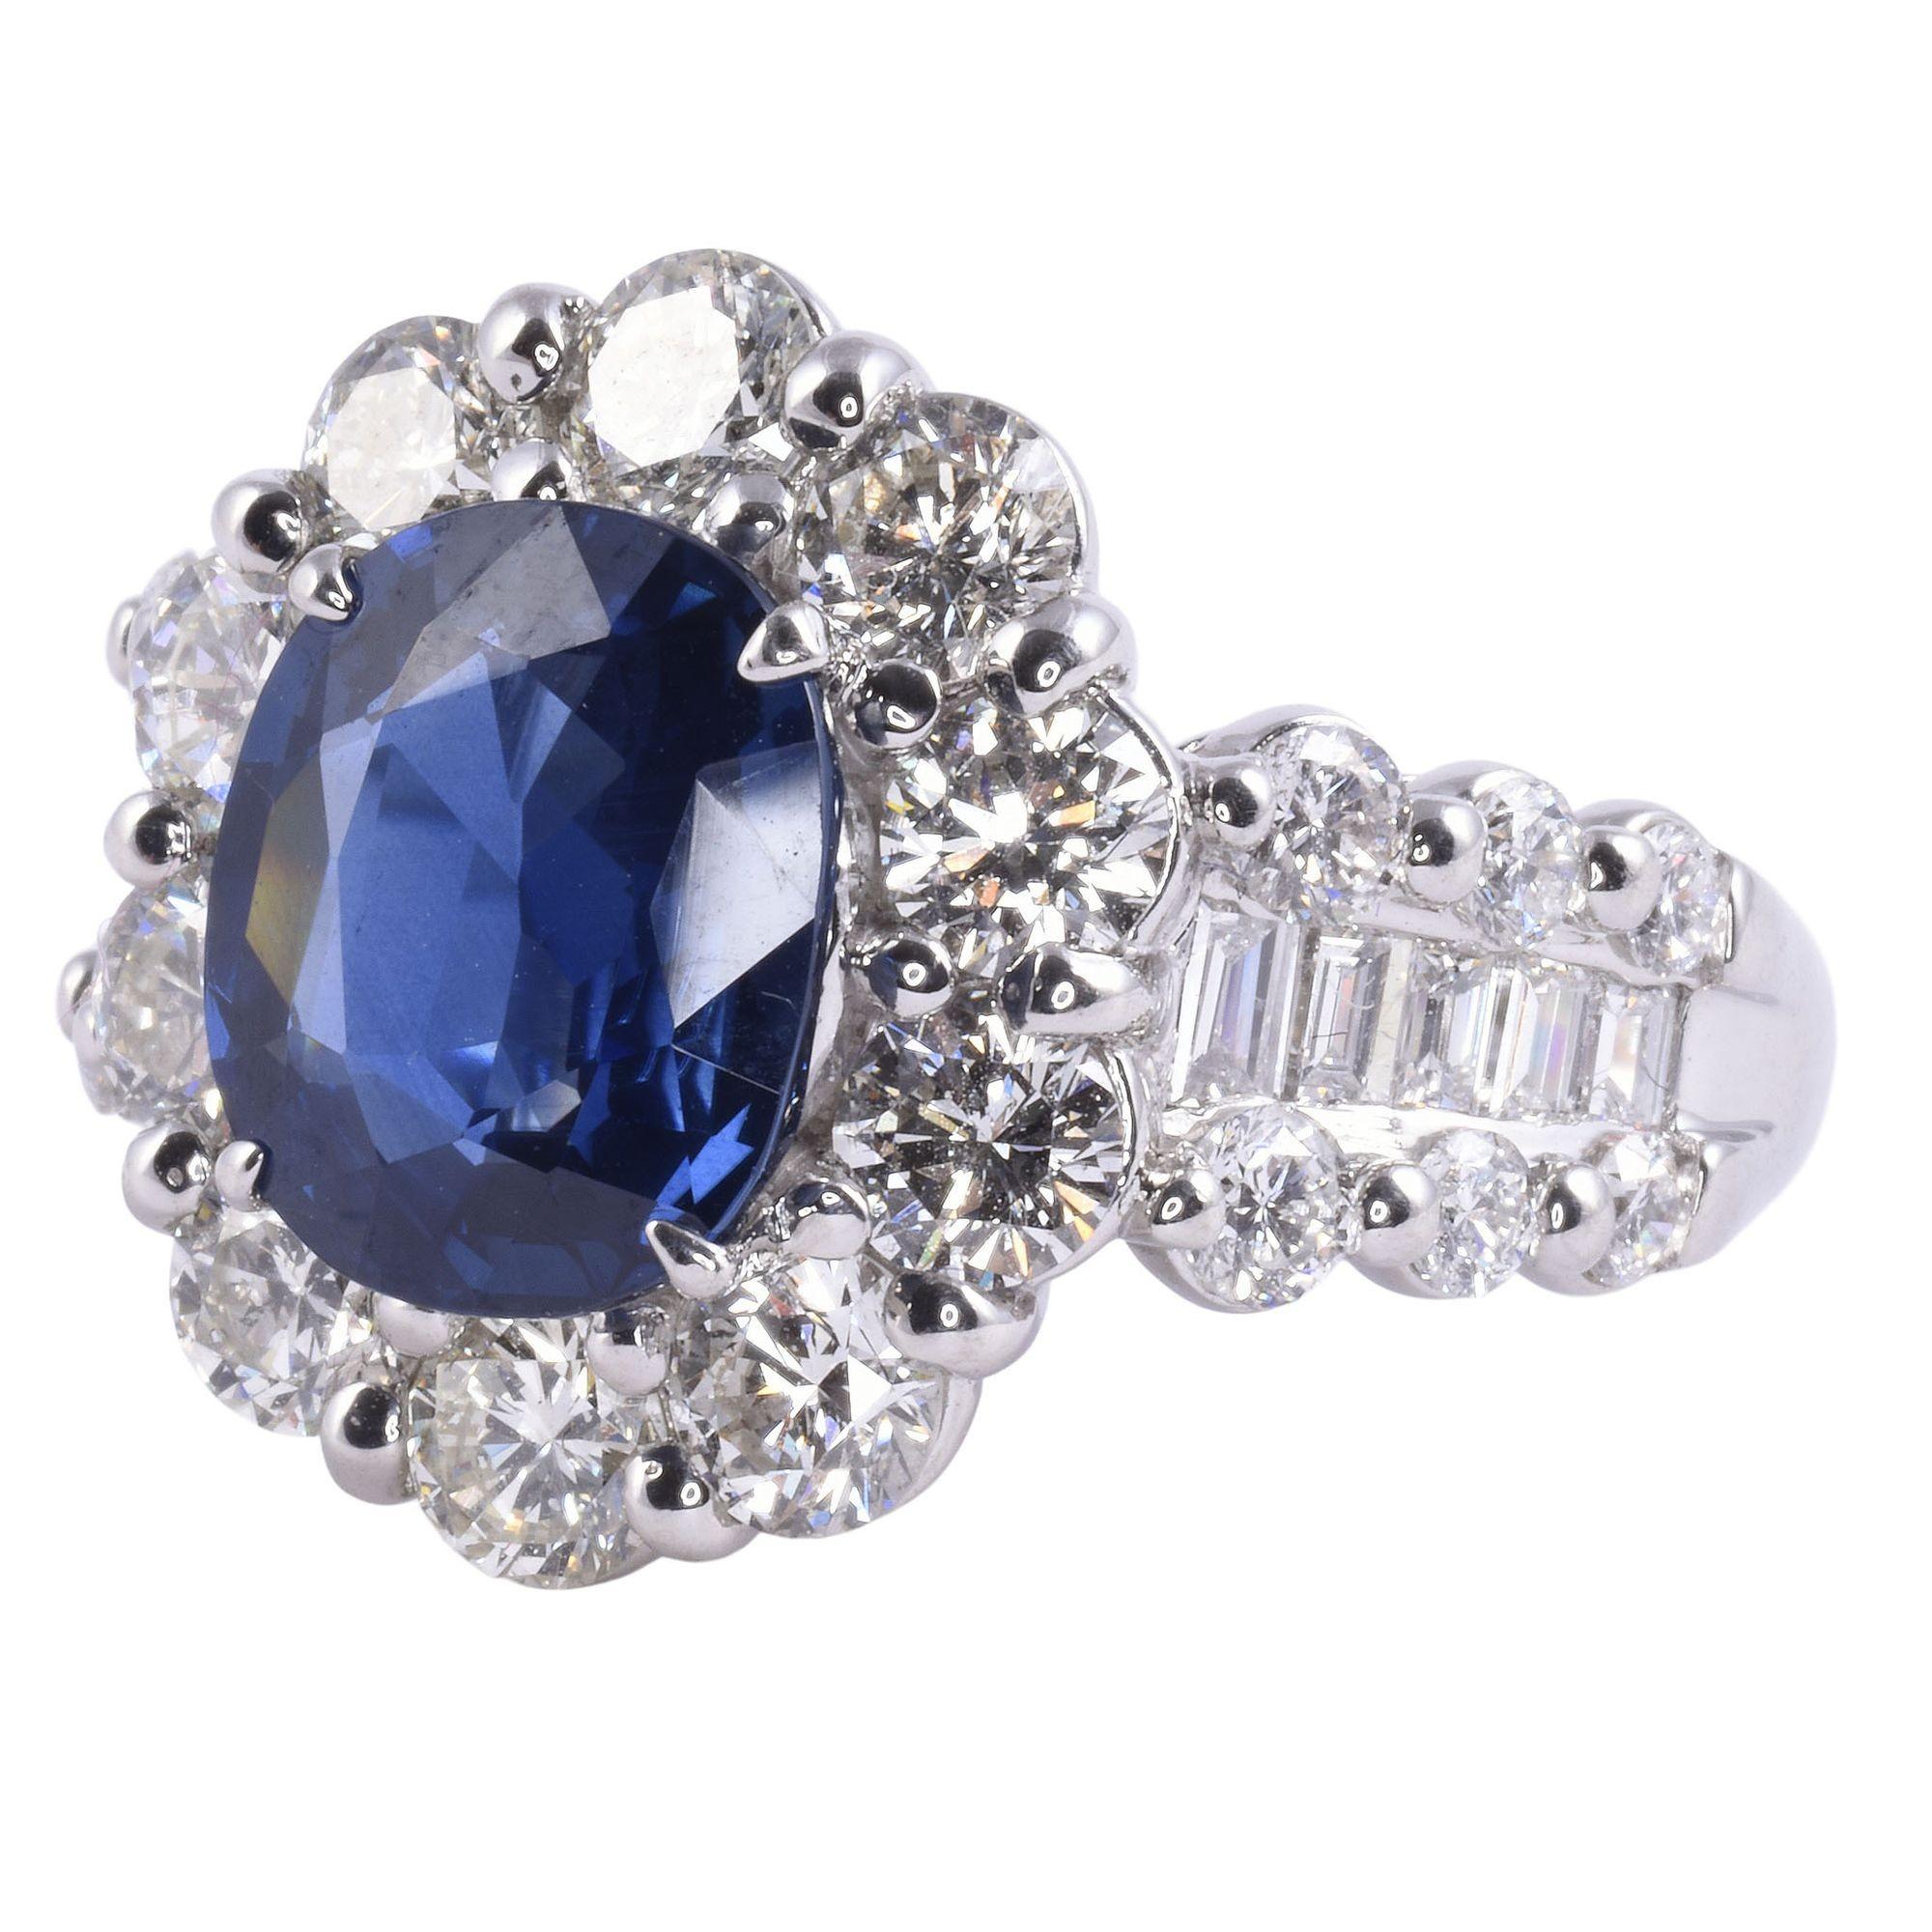 Estate 3.45 carat sapphire & 2.95 CTW diamond platinum ring. This estate platinum ring features a 3.45 carat oval sapphire. The sapphire ring is accented with 2.95 carat total weight of round brilliant and baguette diamonds. This sapphire platinum